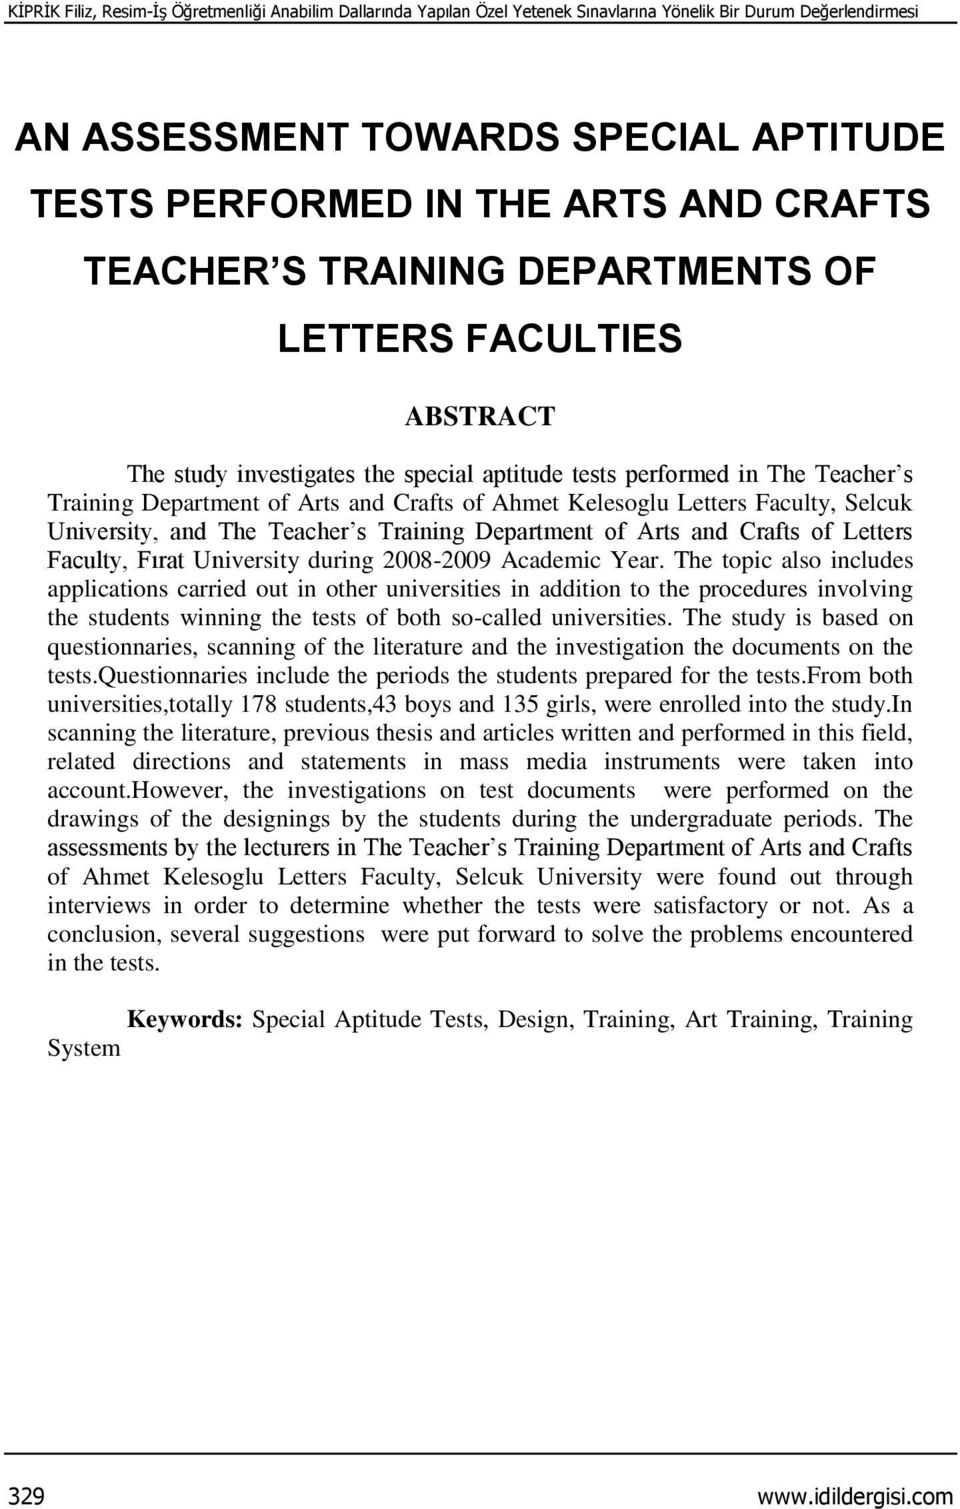 Kelesoglu Letters Faculty, Selcuk University, and The Teacher s Training Department of Arts and Crafts of Letters Faculty, Fırat University during 2008-2009 Academic Year.